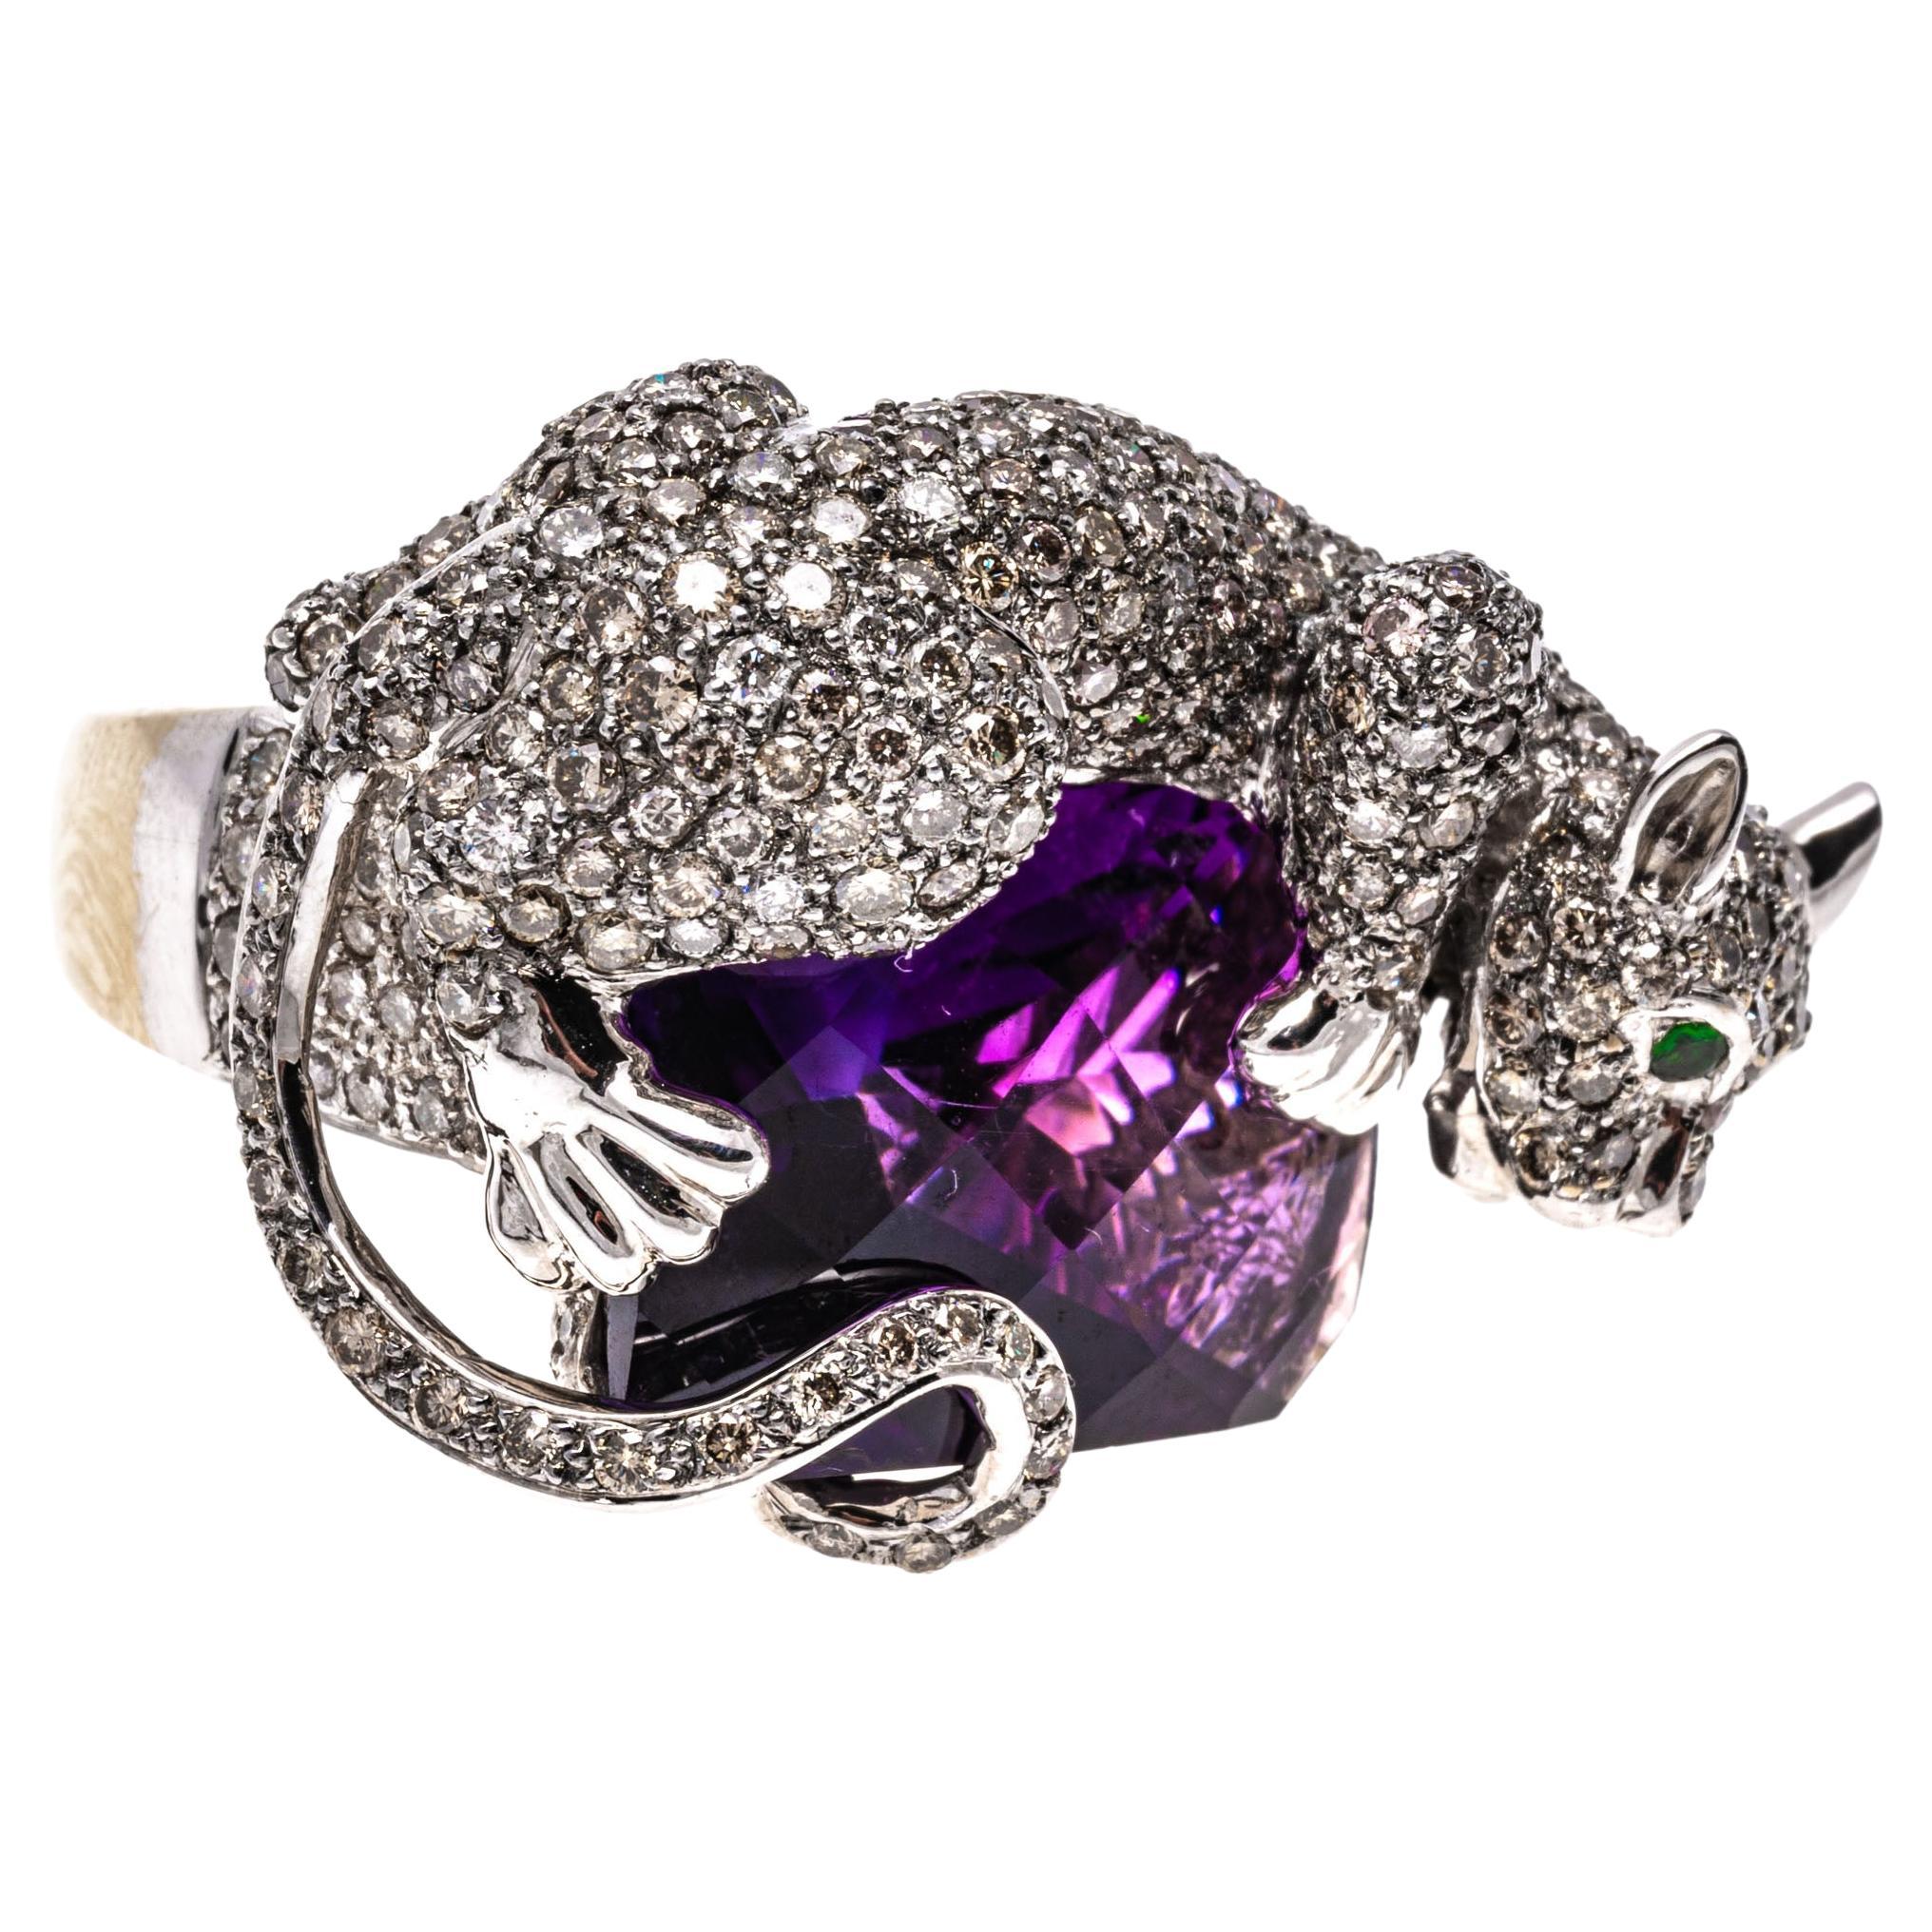 14k gold ring. This stunning ring is a white rhodium, yellow gold, figural panther, pave set with round faceted diamonds, approximately 2.82 TCW and laying atop a rectangular cushion checkerboard cut, medium to dark purple color amethyst,